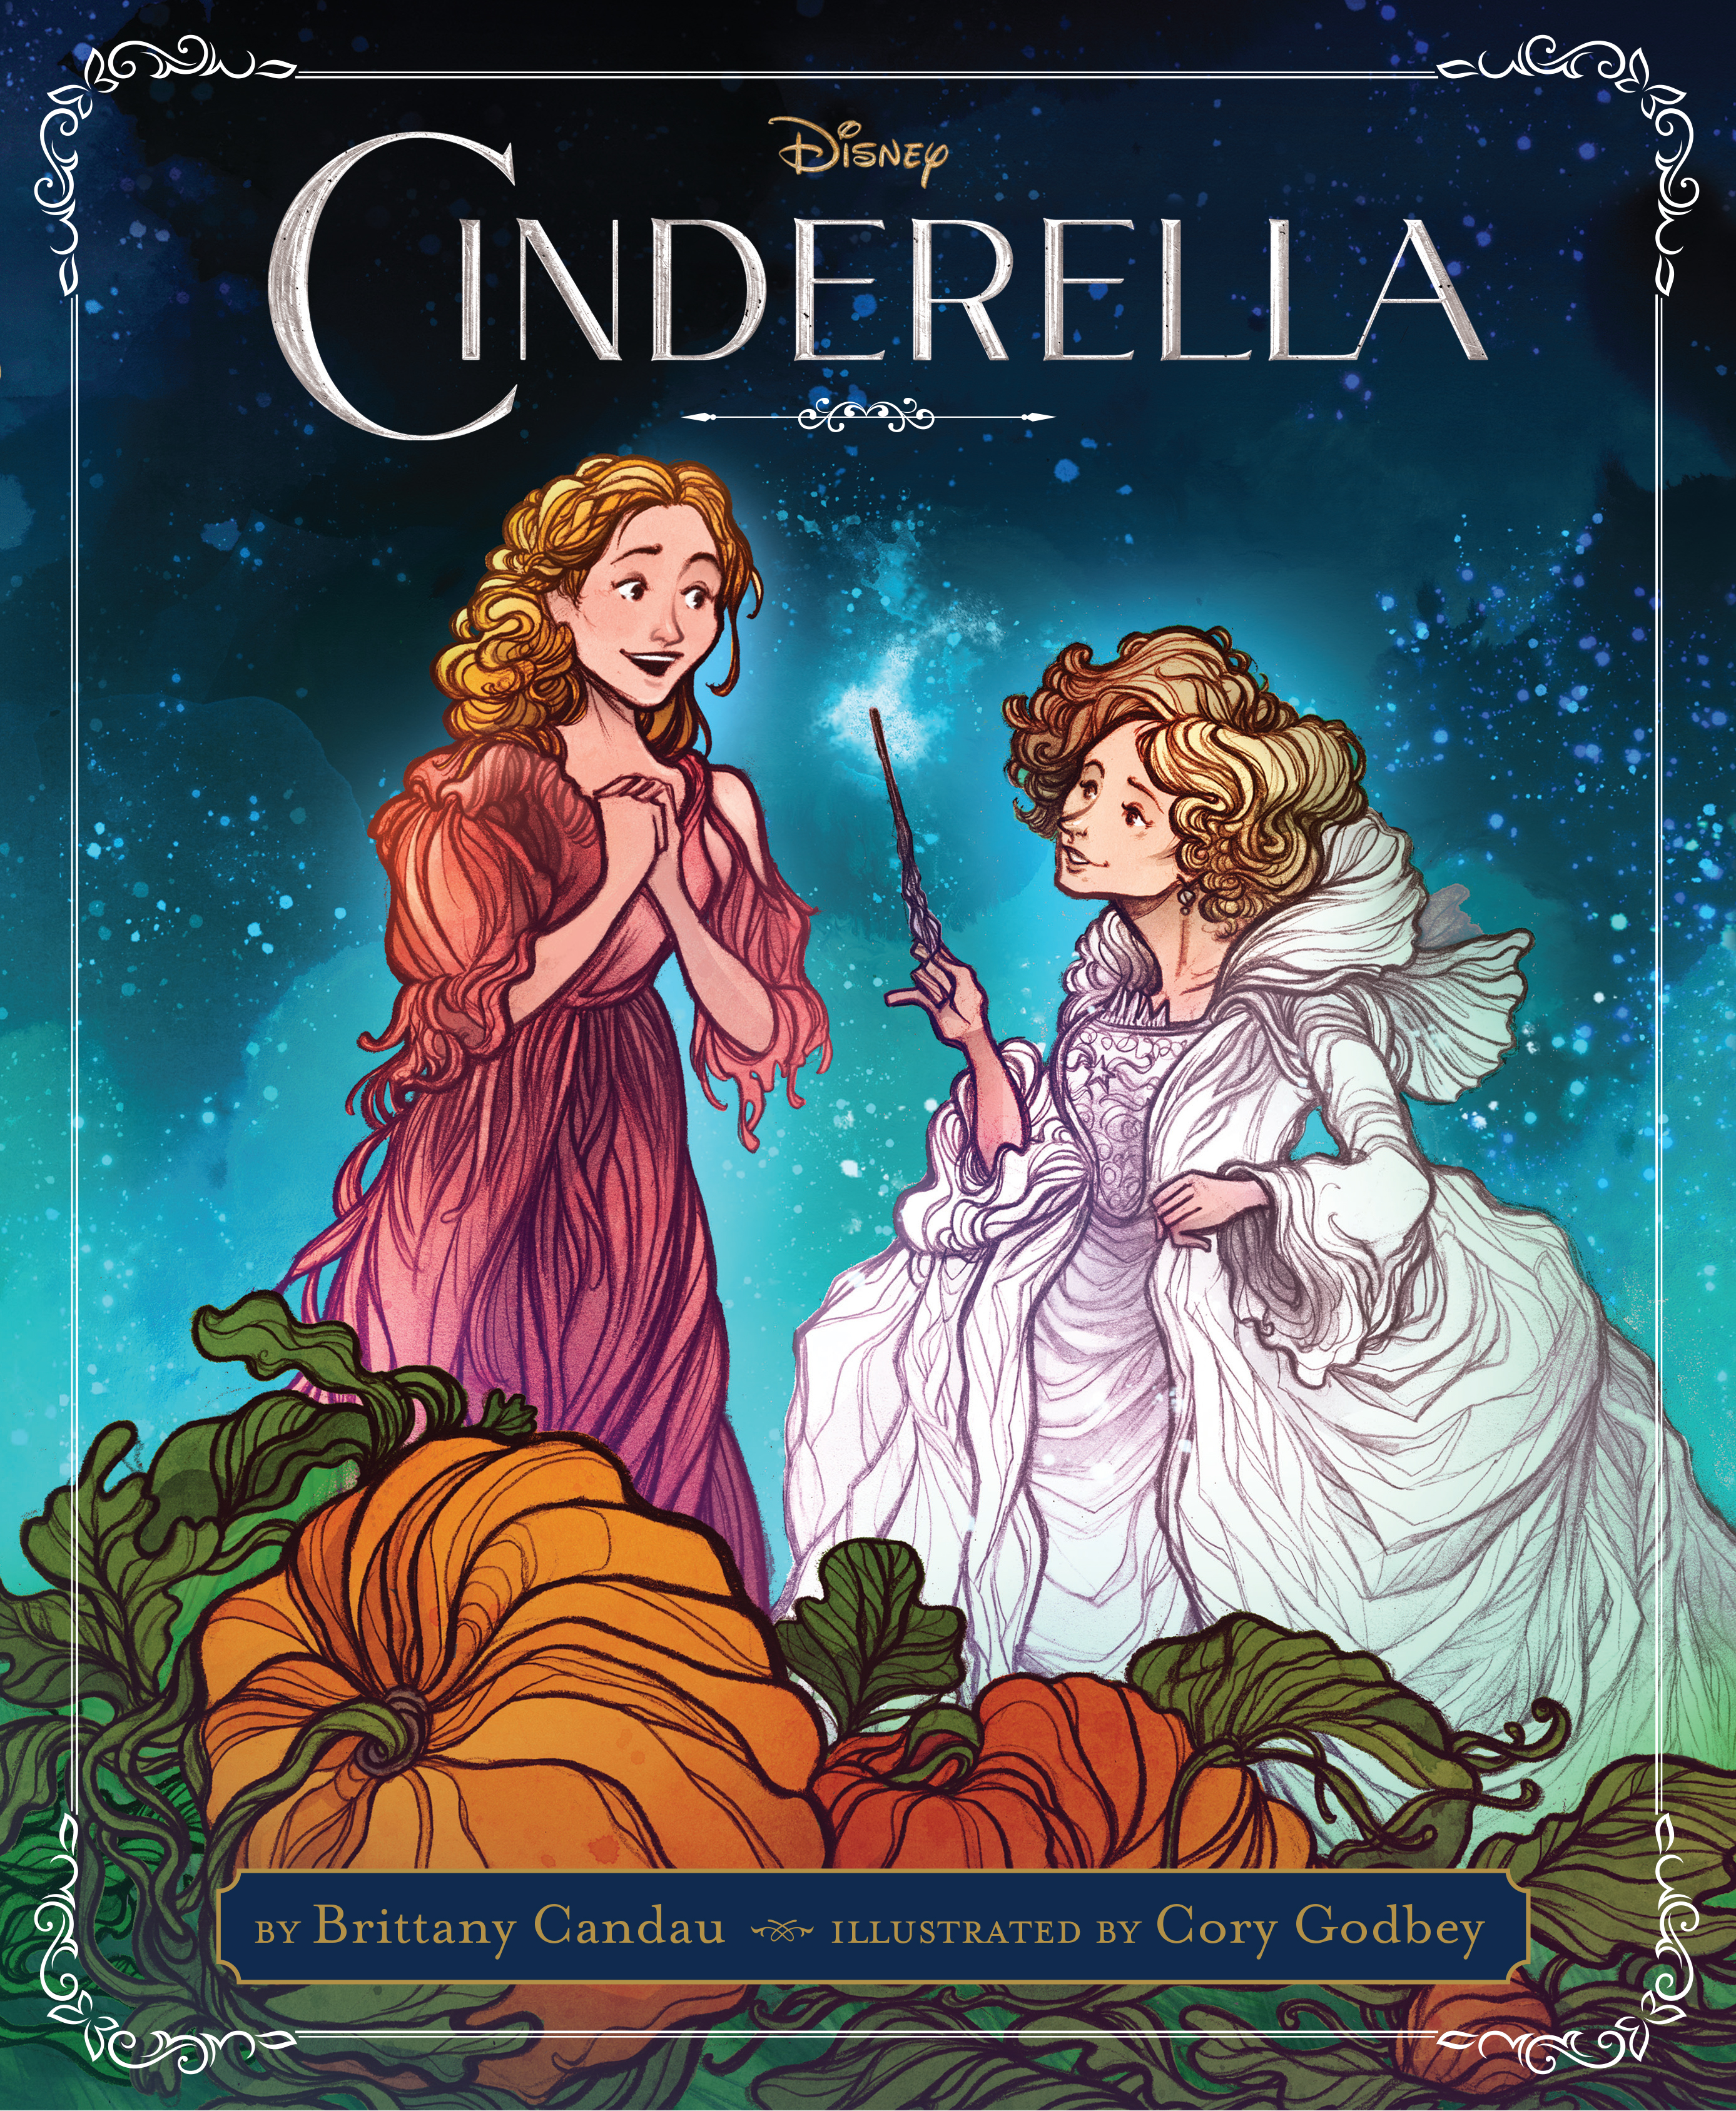 book review on cinderella